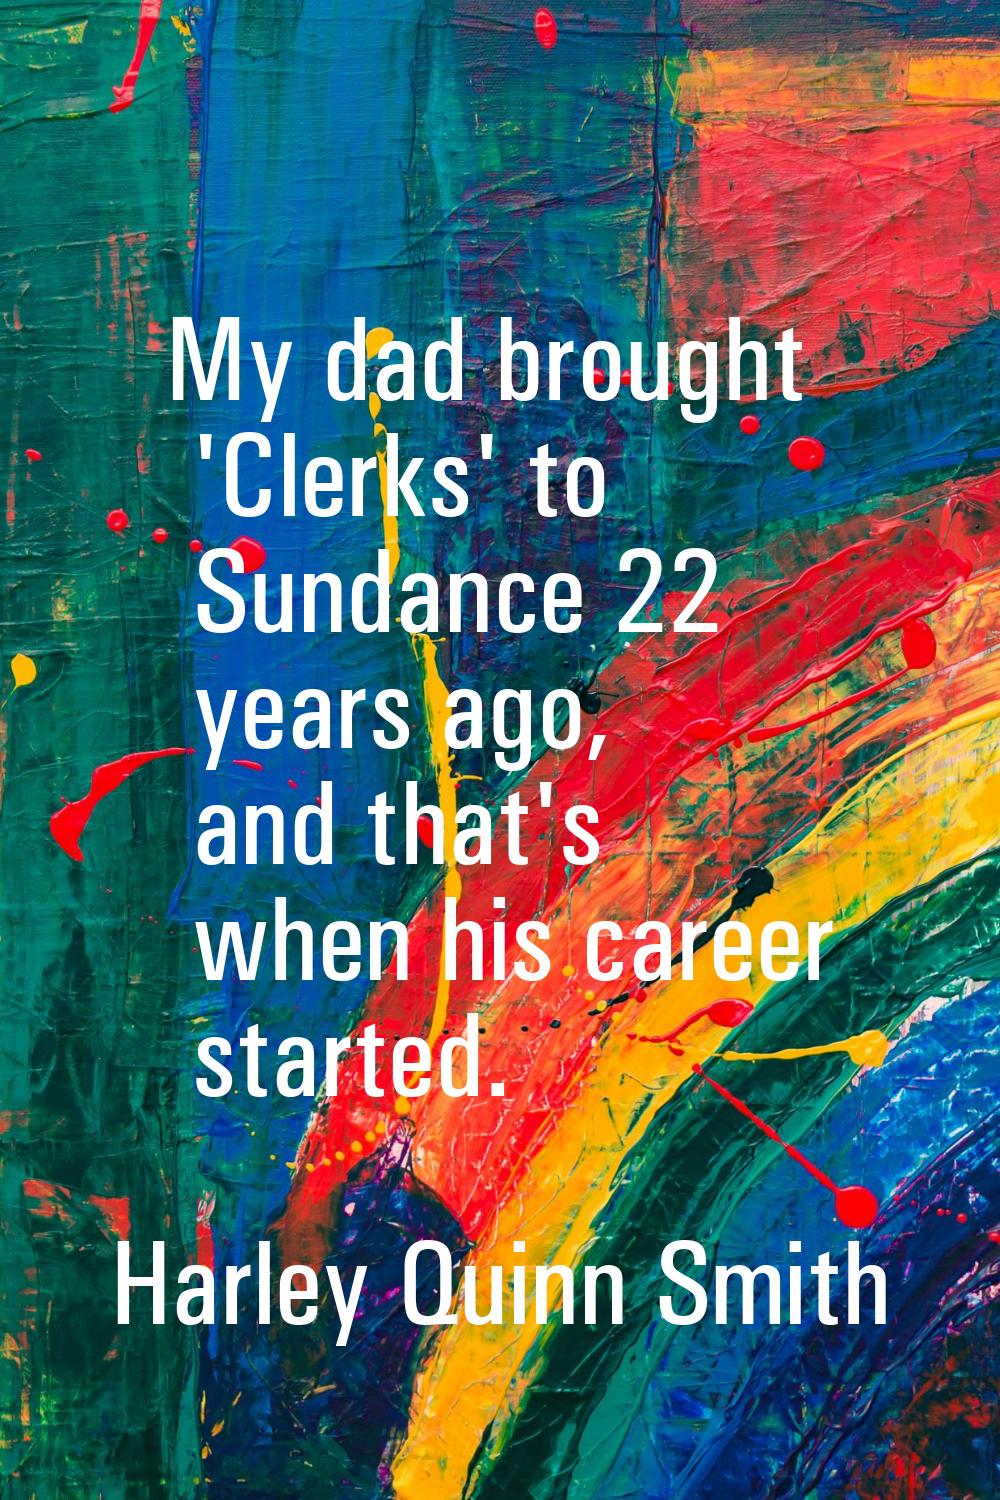 My dad brought 'Clerks' to Sundance 22 years ago, and that's when his career started.